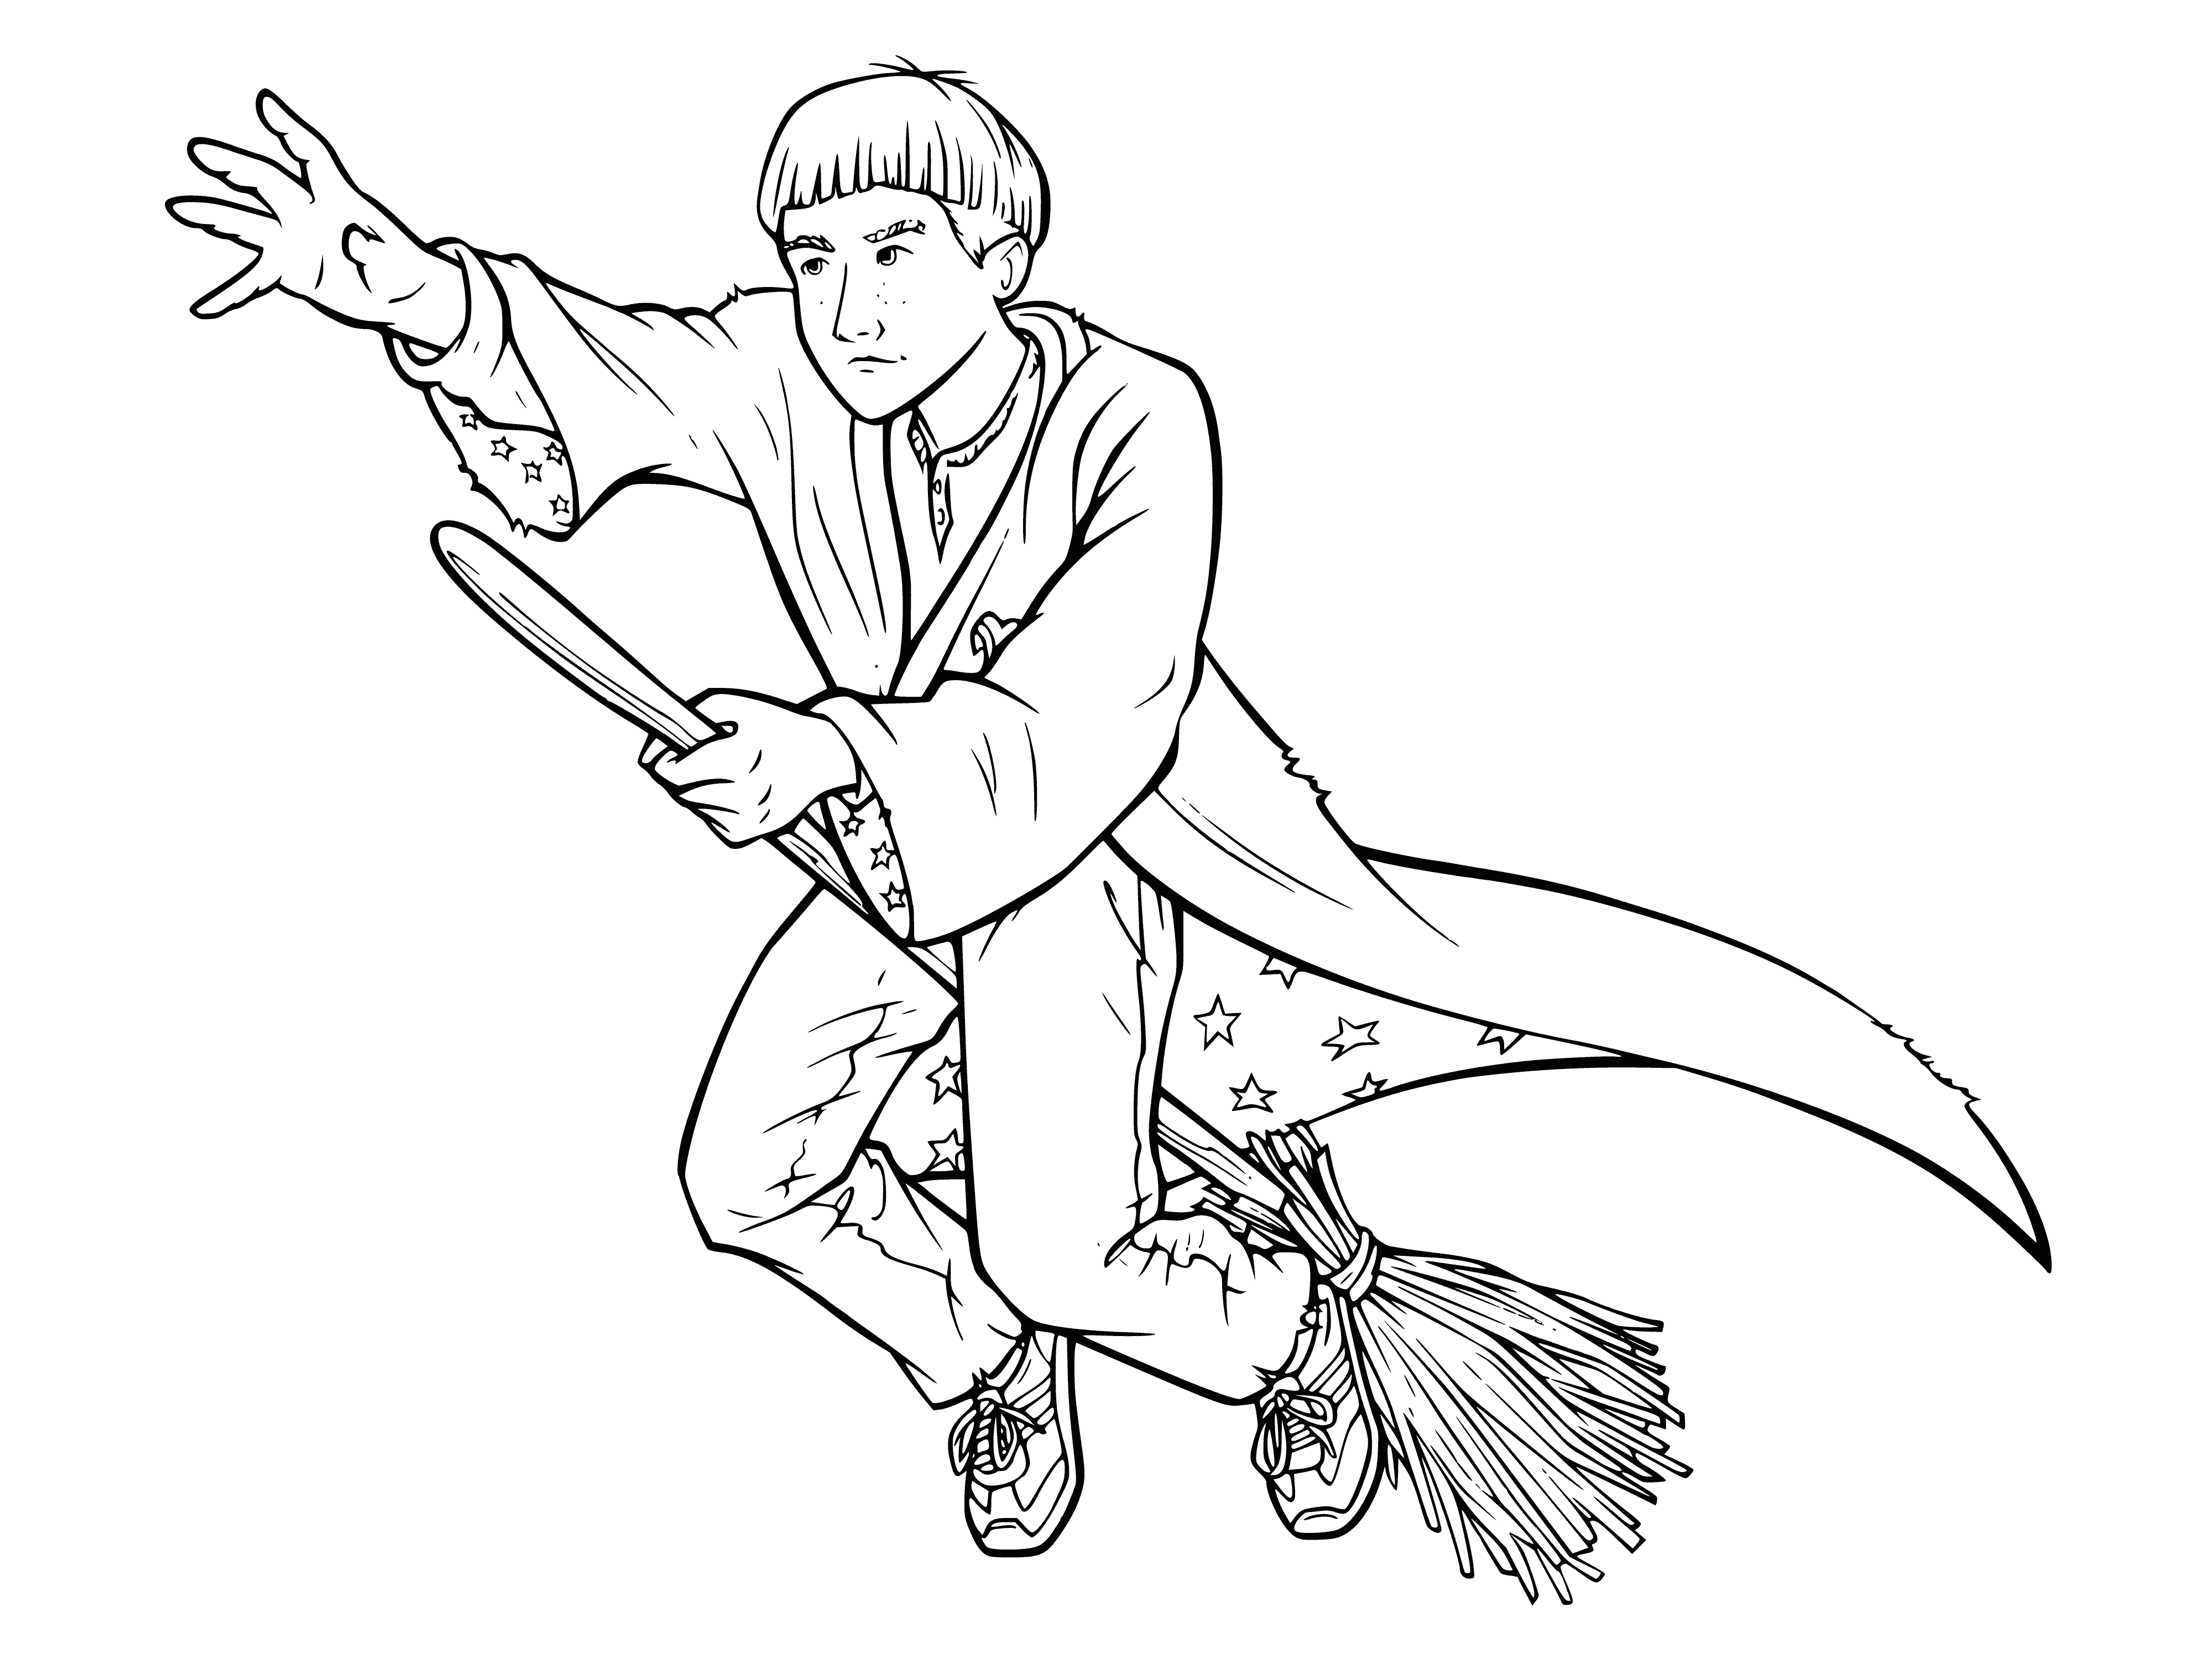 Ron Weasley on a broom coloring page